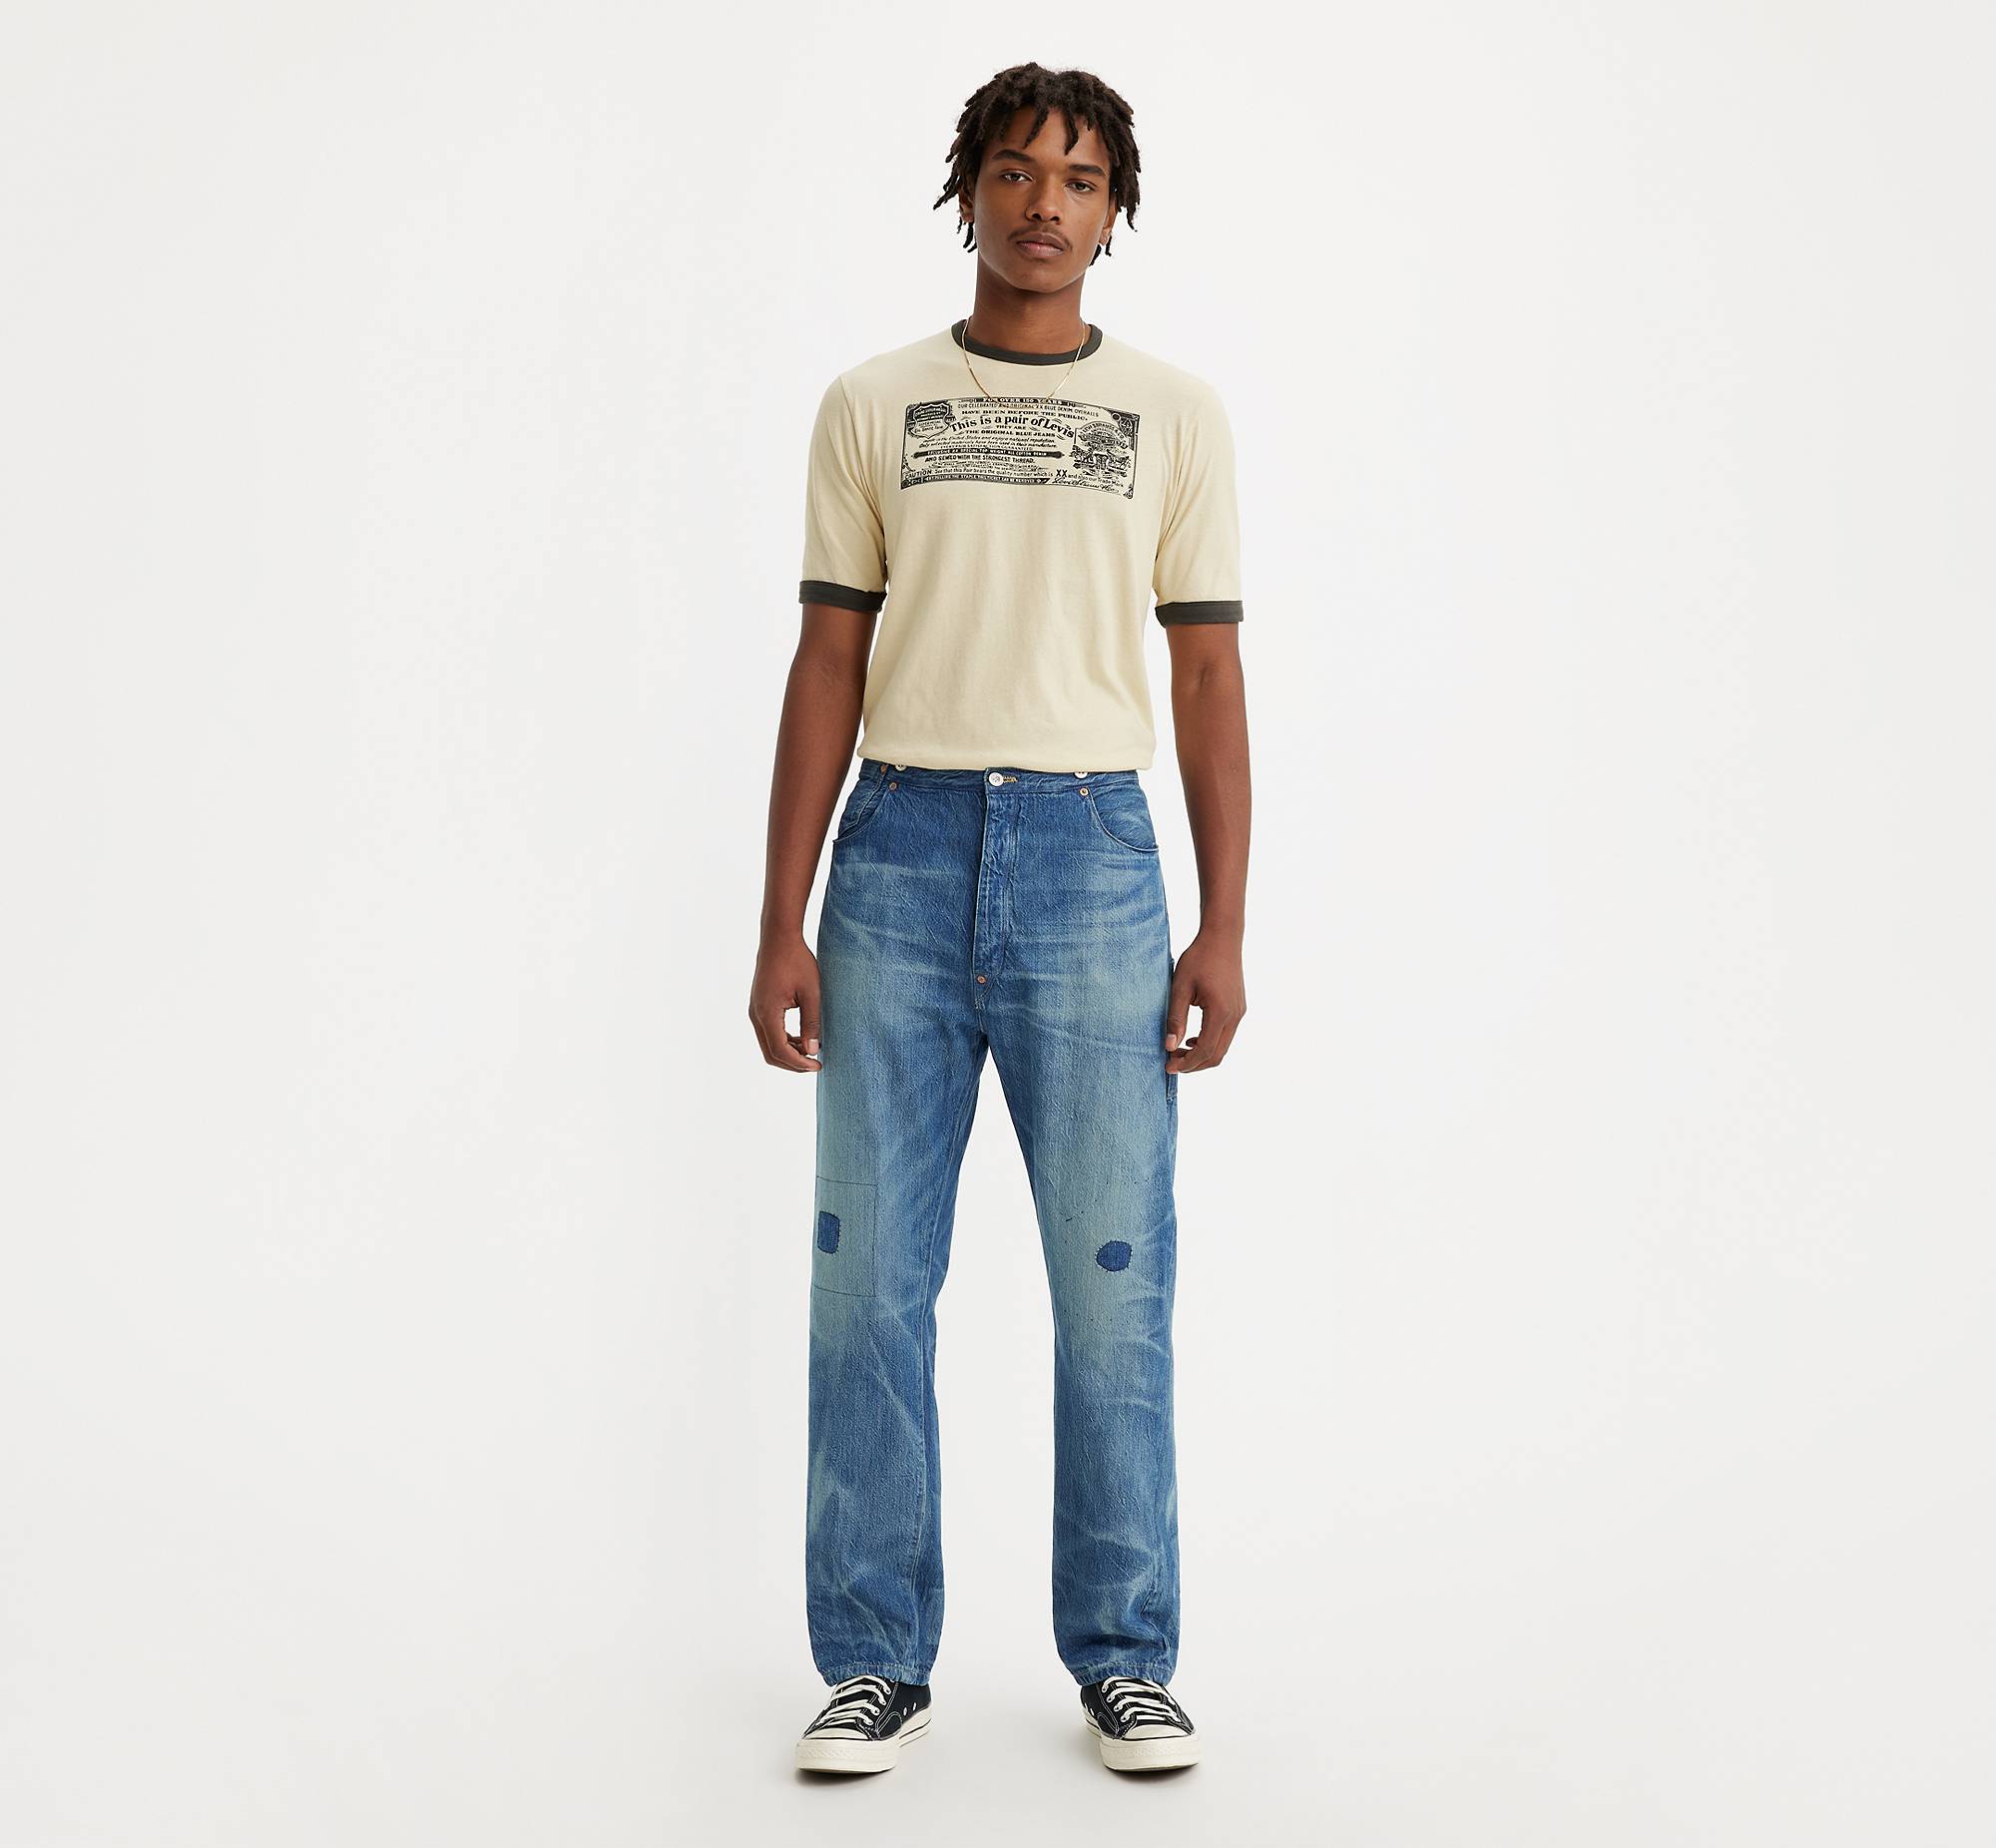 Levi’s® Vintage Clothing 1870s Nevada Jeans 5